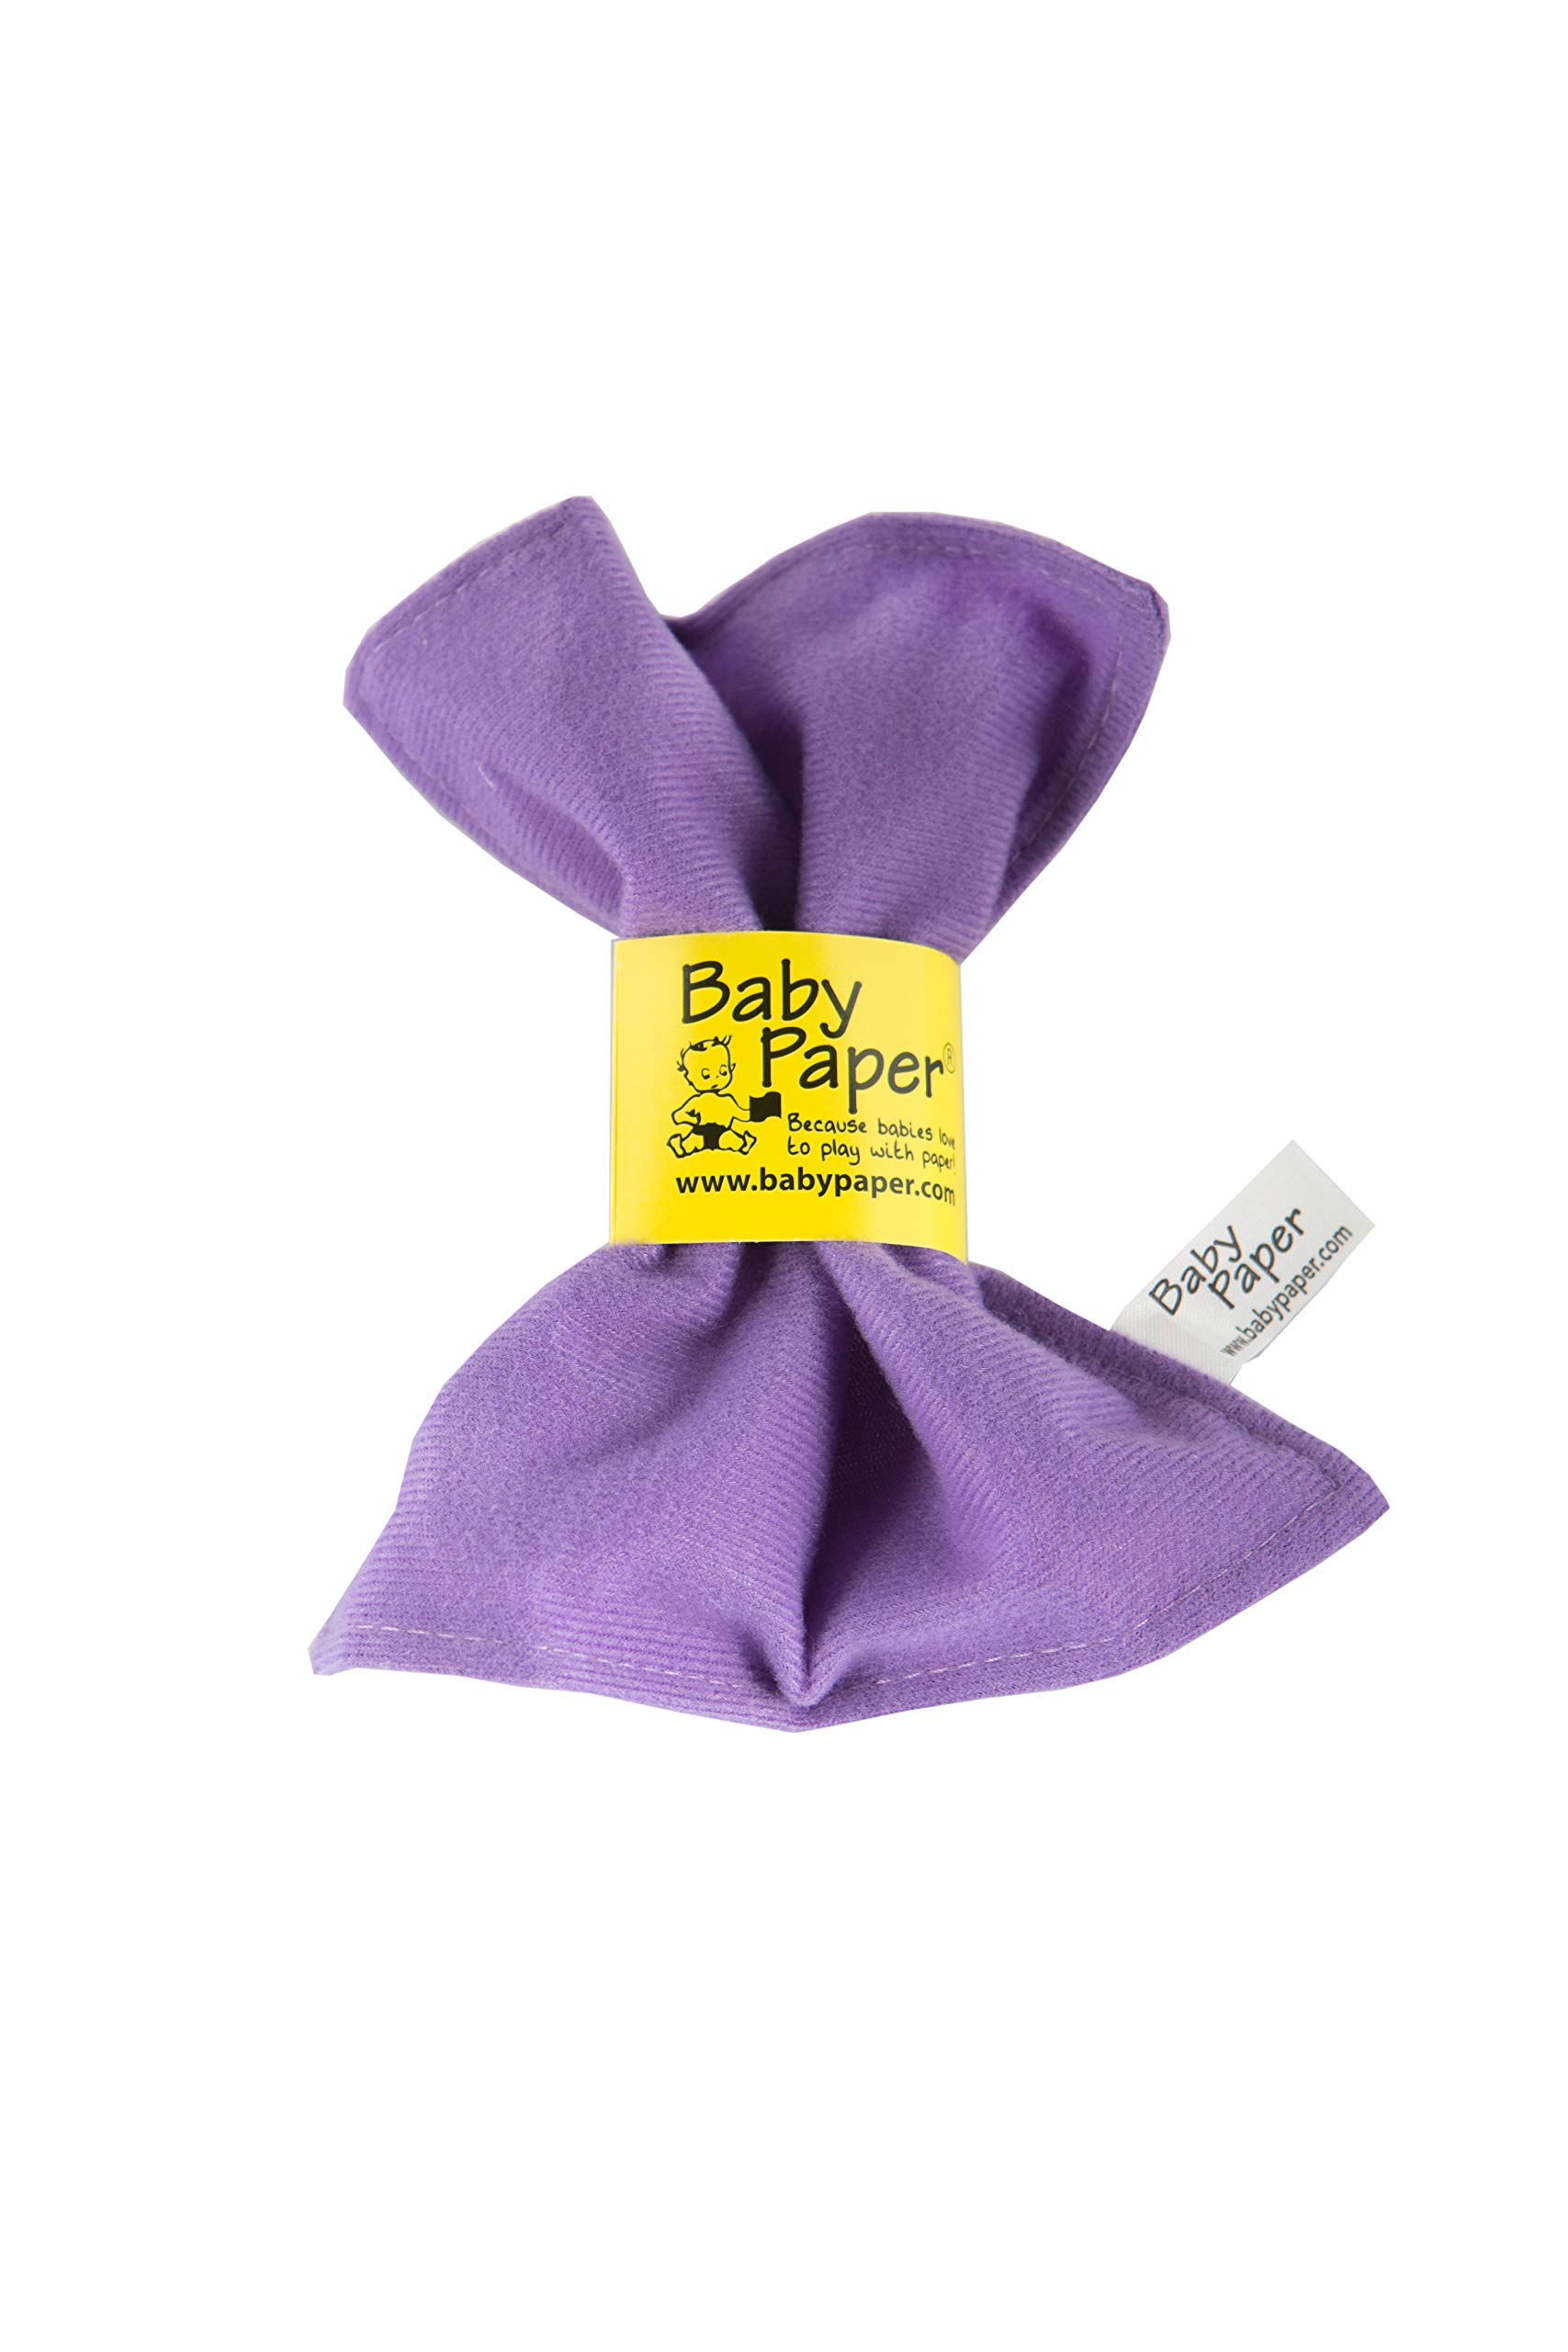 Original Baby Paper - Crinkle Paper and Sensory Toy for Babies and Infants | Lilac | Non-Toxic, Washable | for Baby Showers